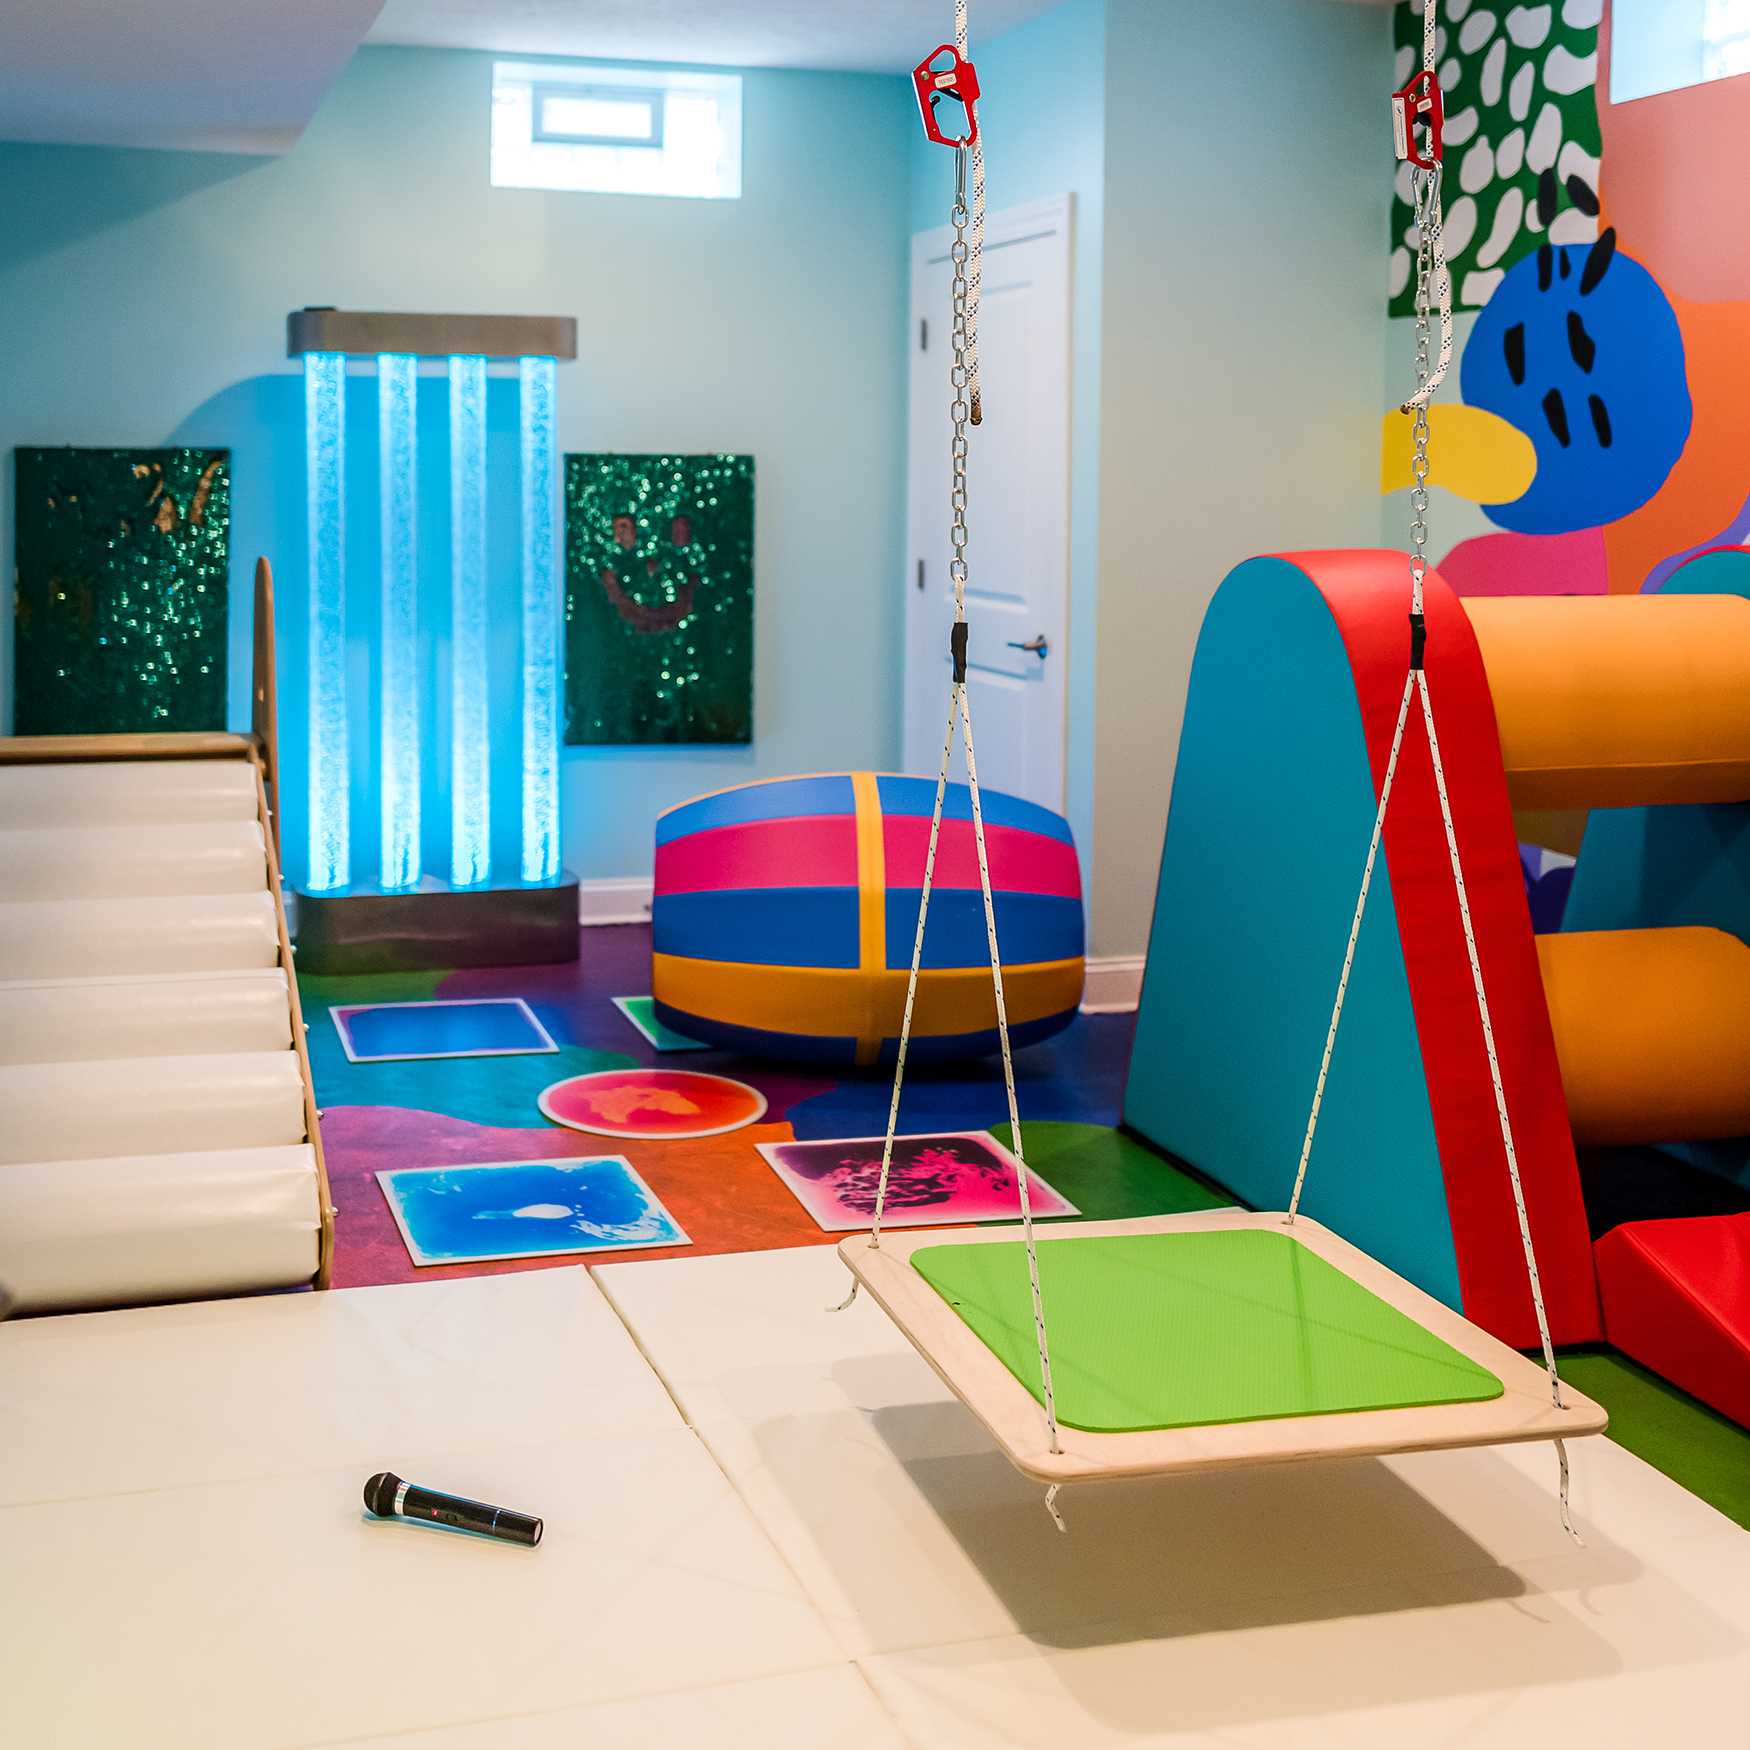 How Sensory Spaces Promote Social-Emotional Learning